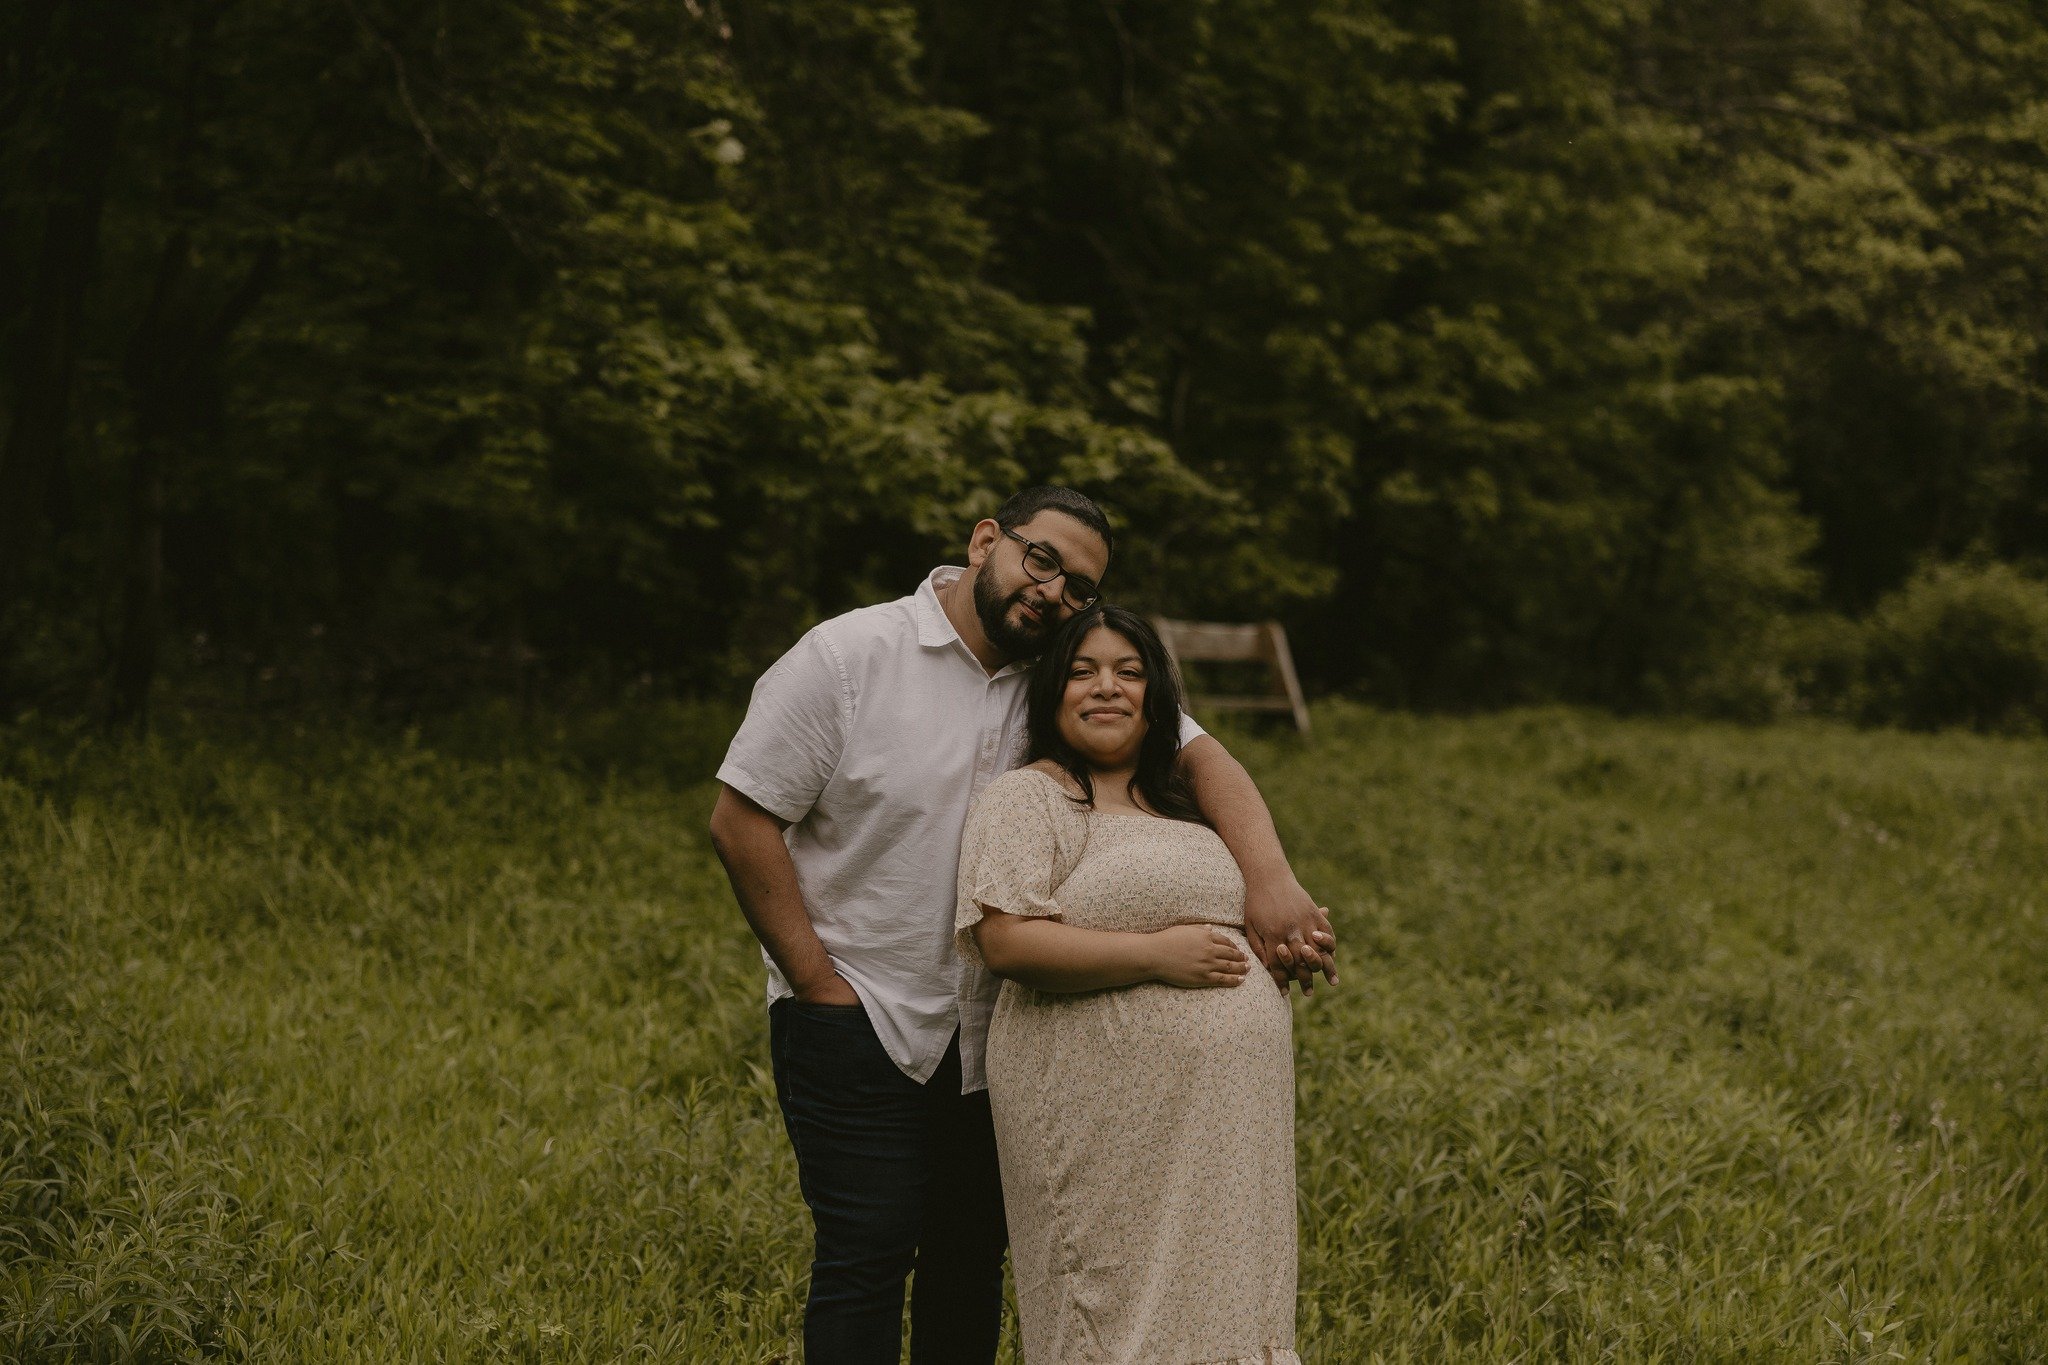 The sweetest parents to be 🖤
Can't wait to meet your lil one so soon!
___
#kalamazooweddingphotographer
#michiganweddingphotographer #theknot
#midwestphotographer #authenticlovemag
#junebugweddings #zolaweddings
#anotherwildstory
#grandrapidswedding